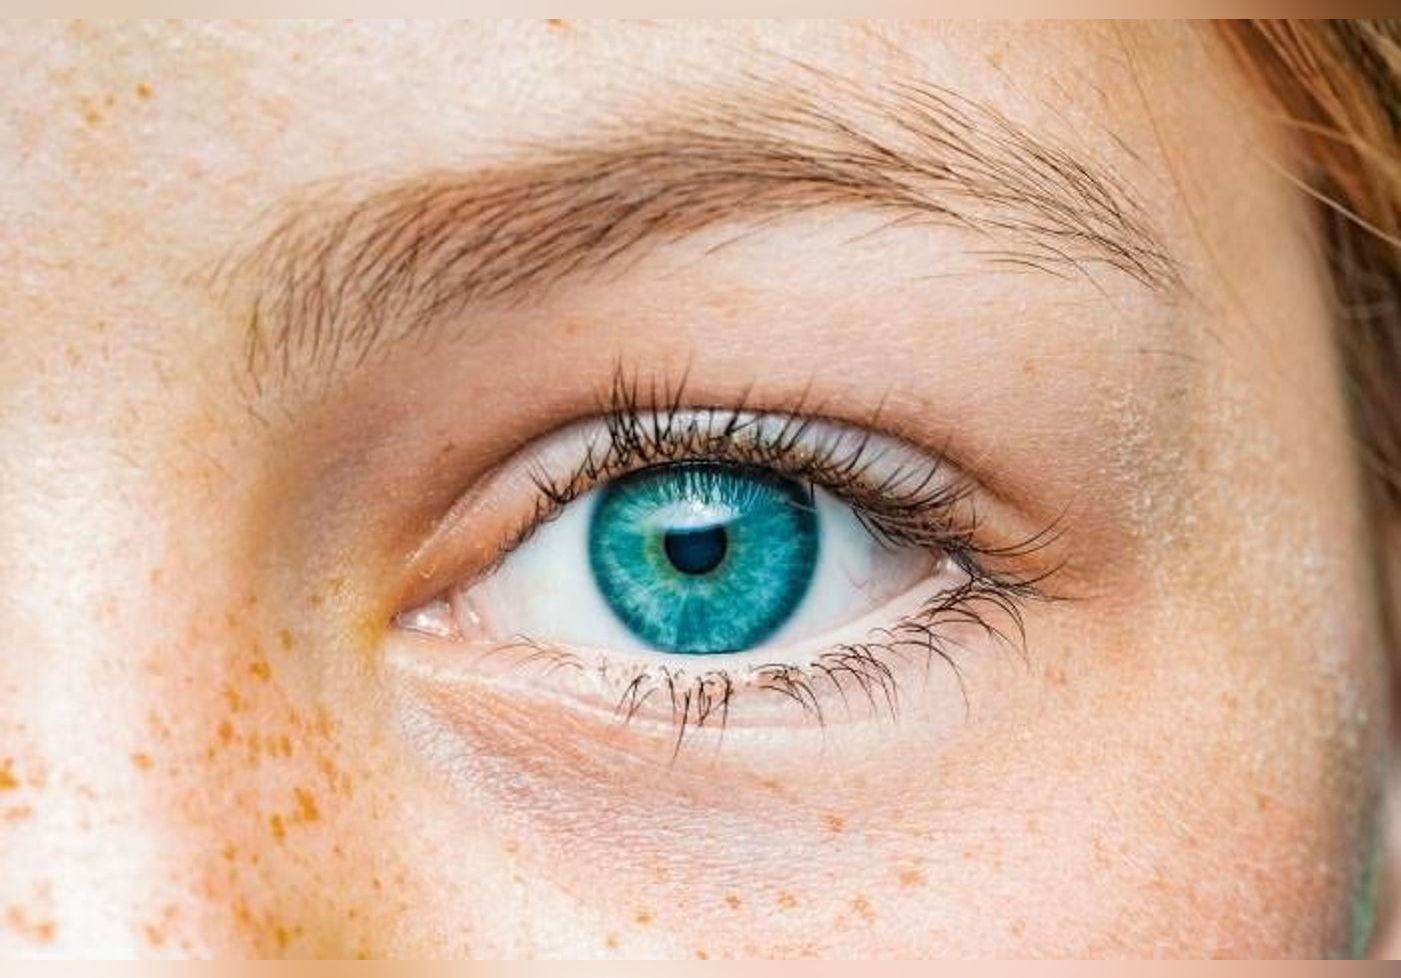 Here's what your eye color says about your personality according to science

